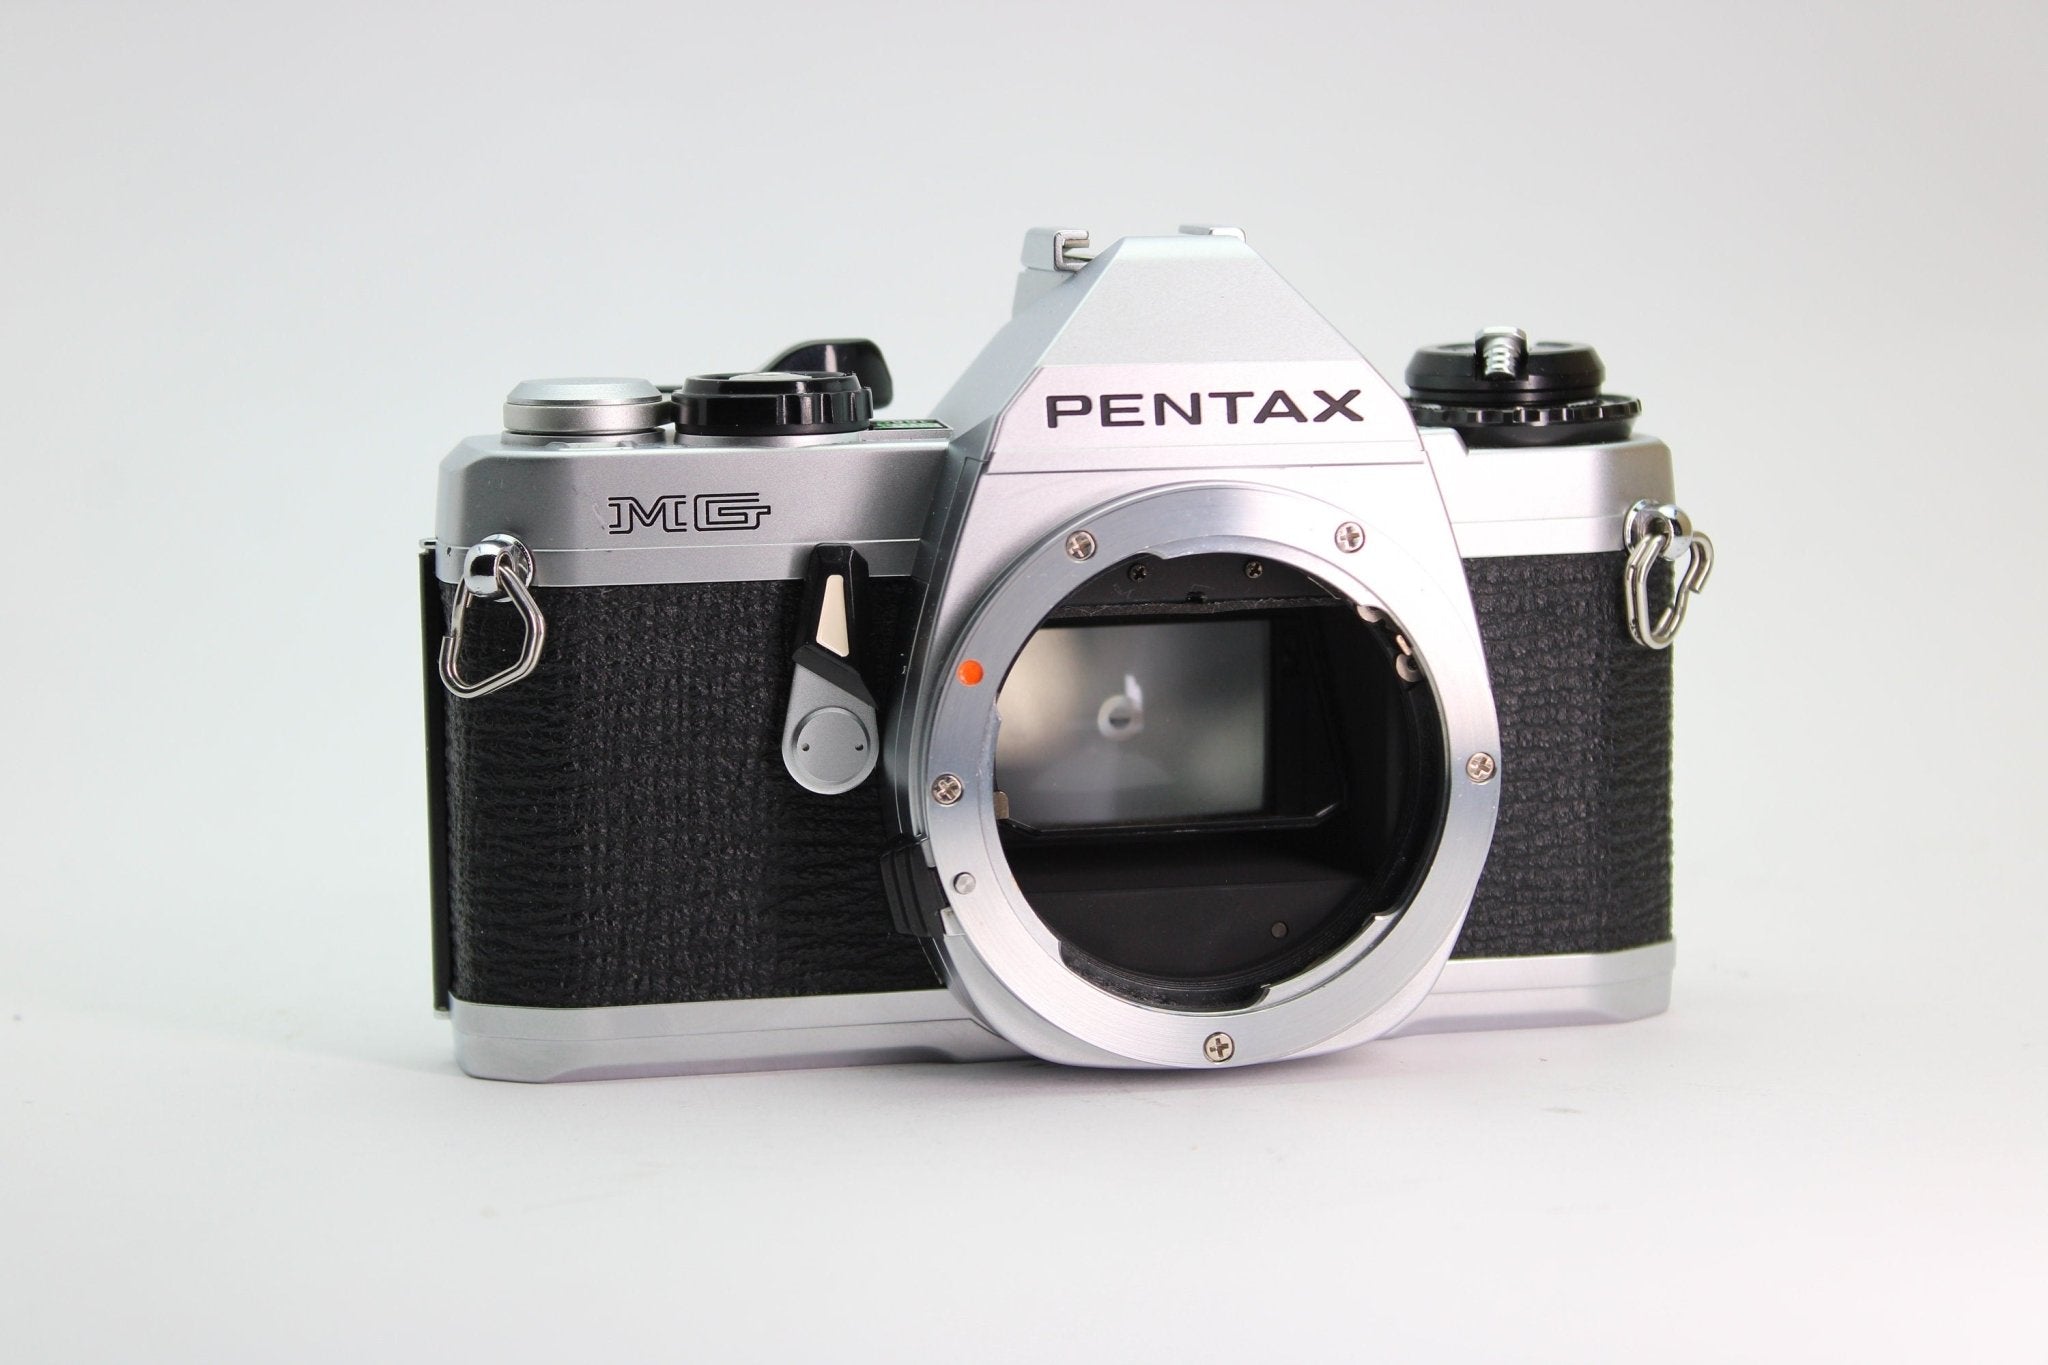 Pentax MG 35mm Film Camera with 50mm Lens - My Store